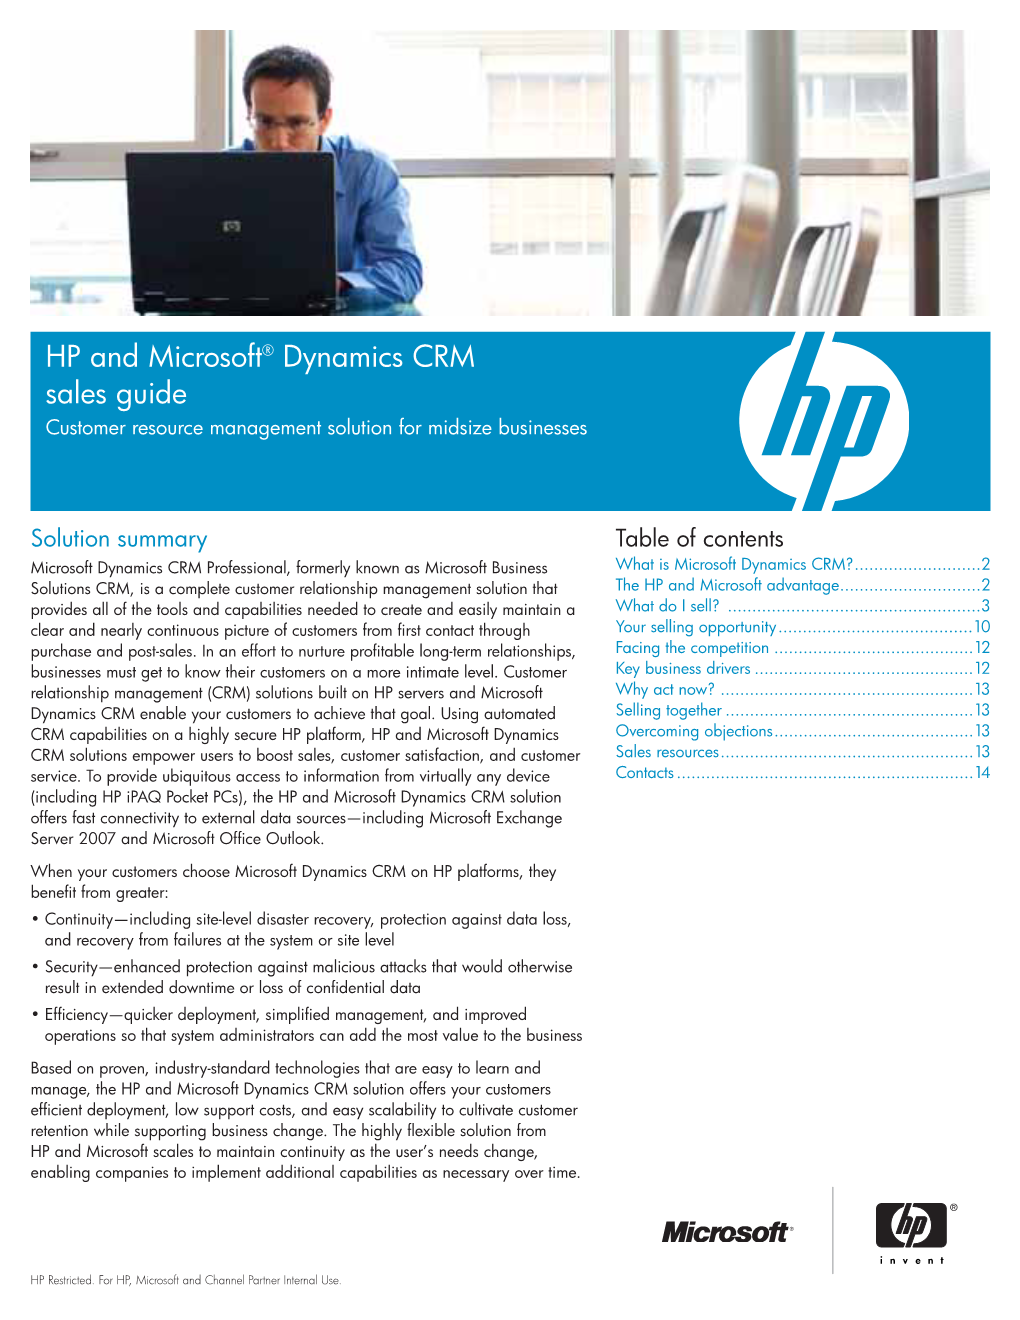 HP and Microsoft® Dynamics CRM Sales Guide Customer Resource Management Solution for Midsize Businesses